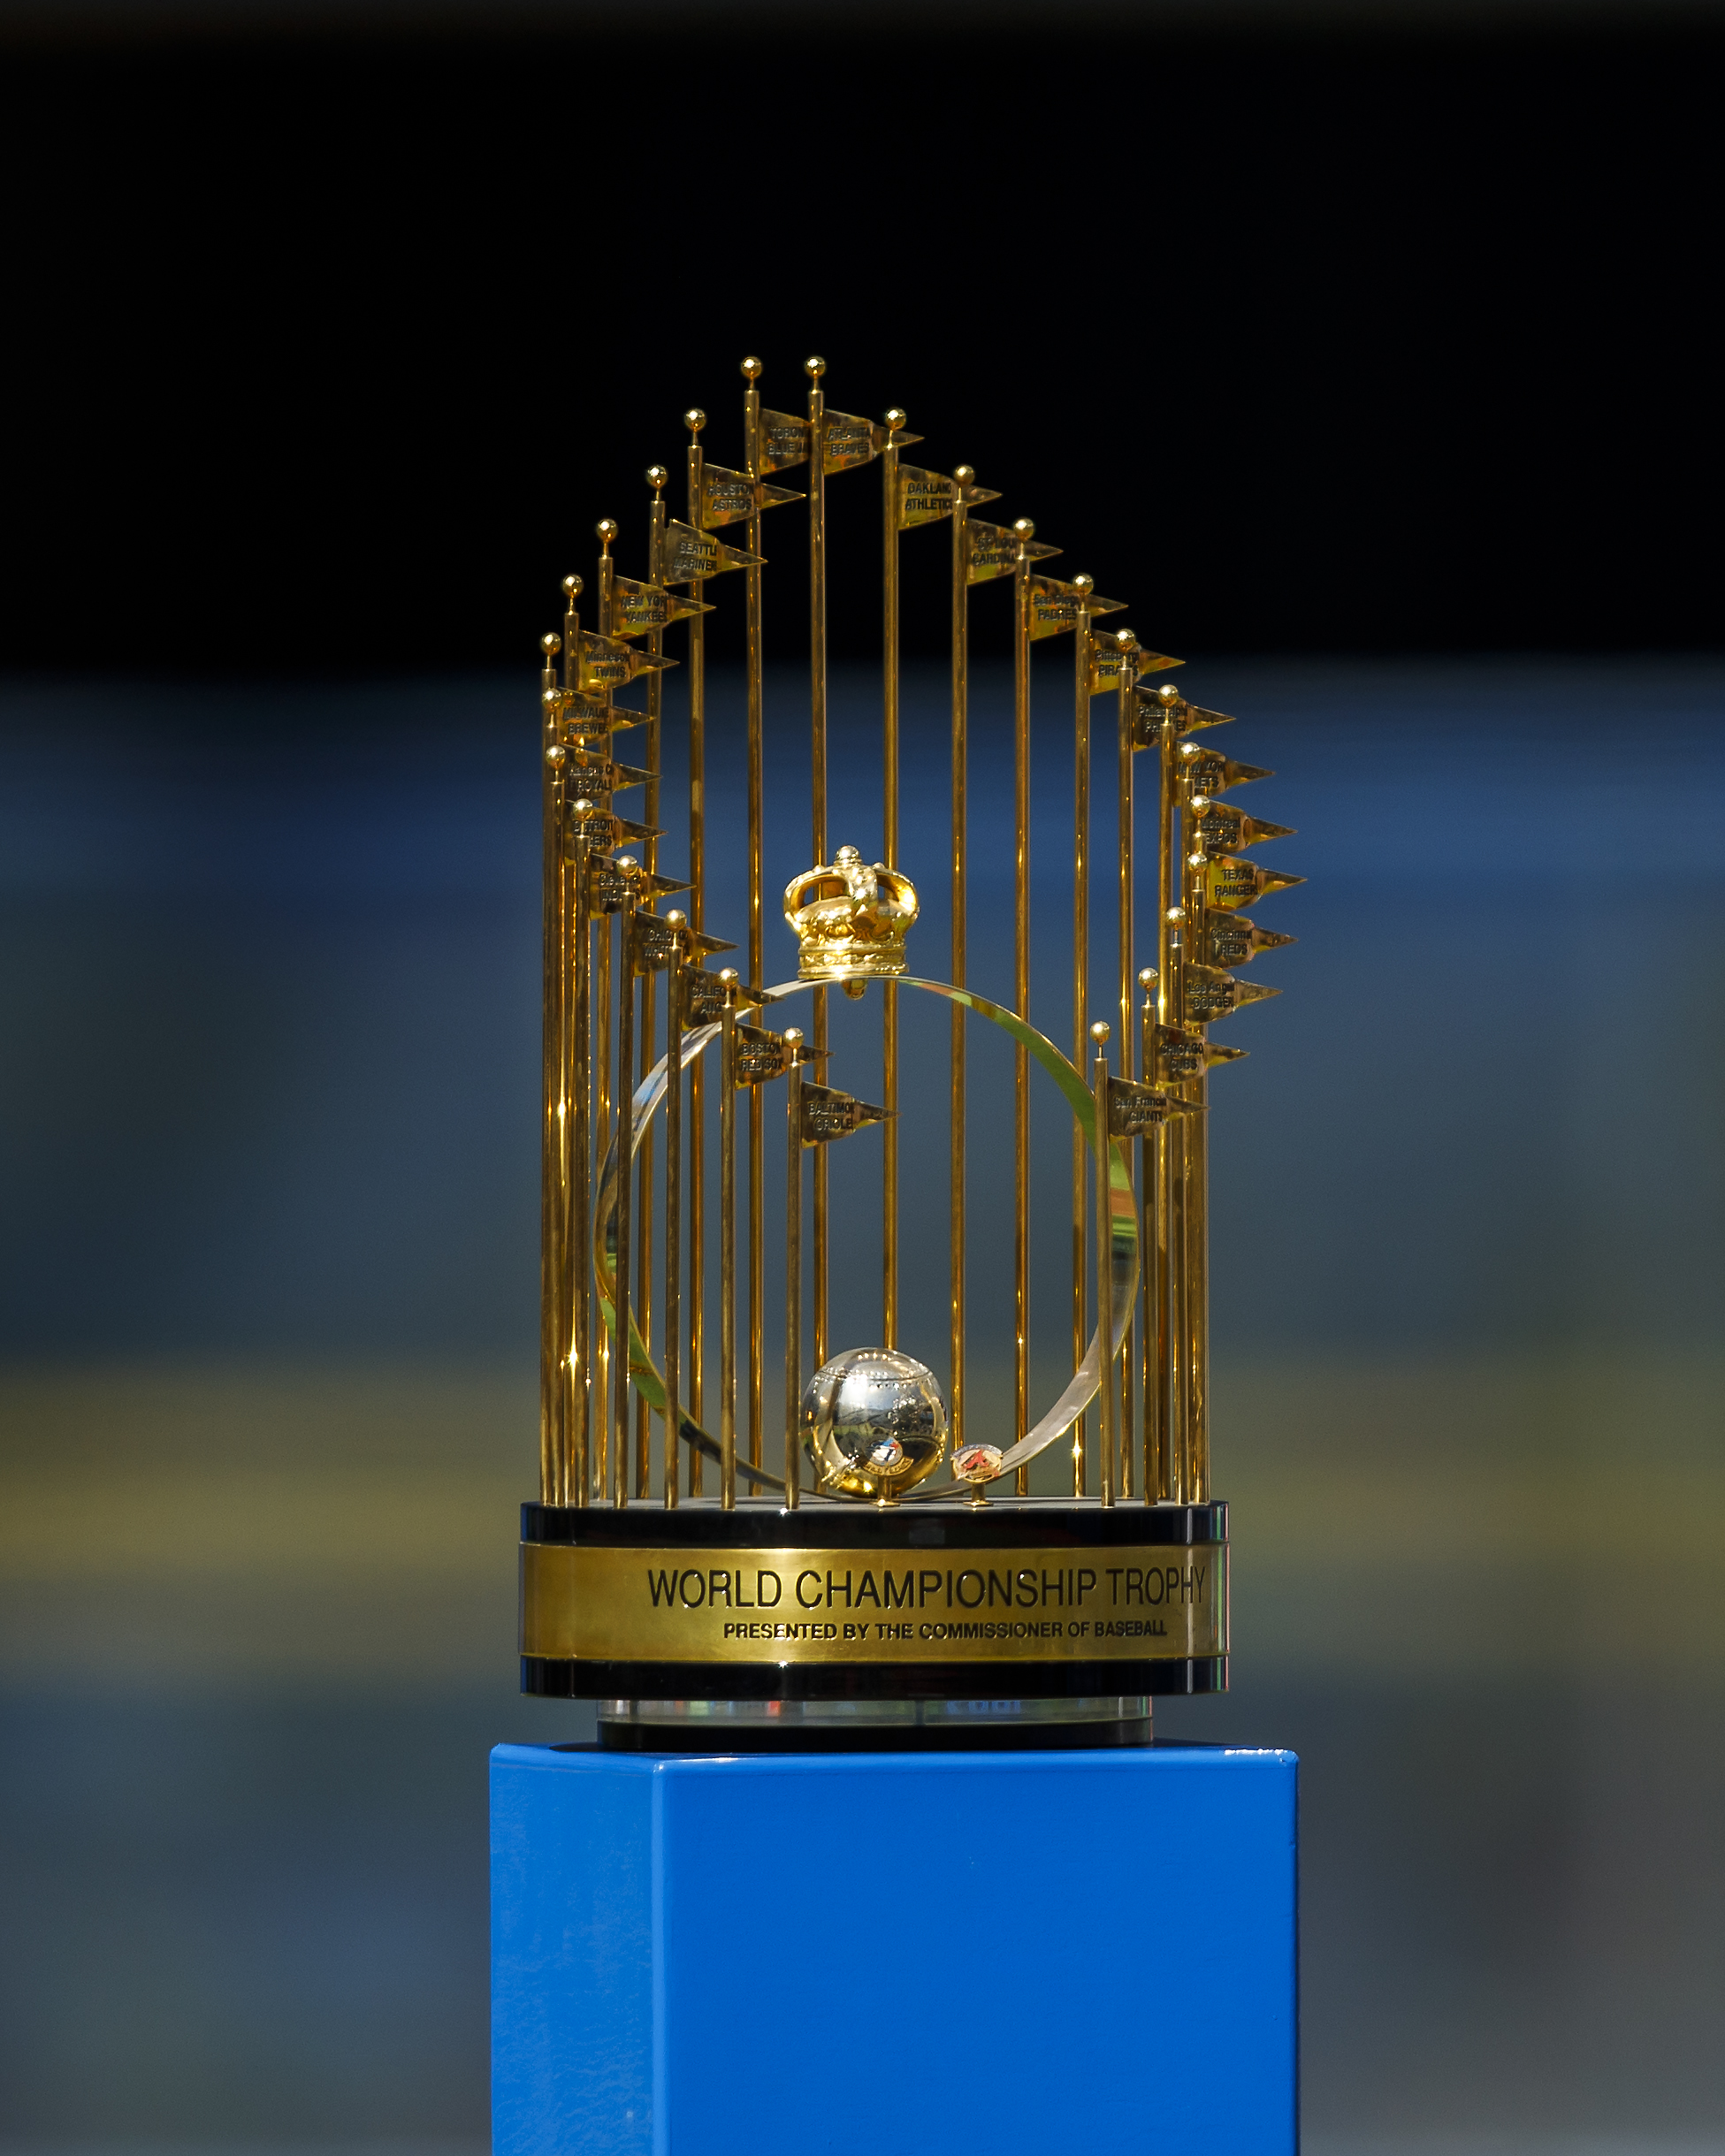 The world series trophy